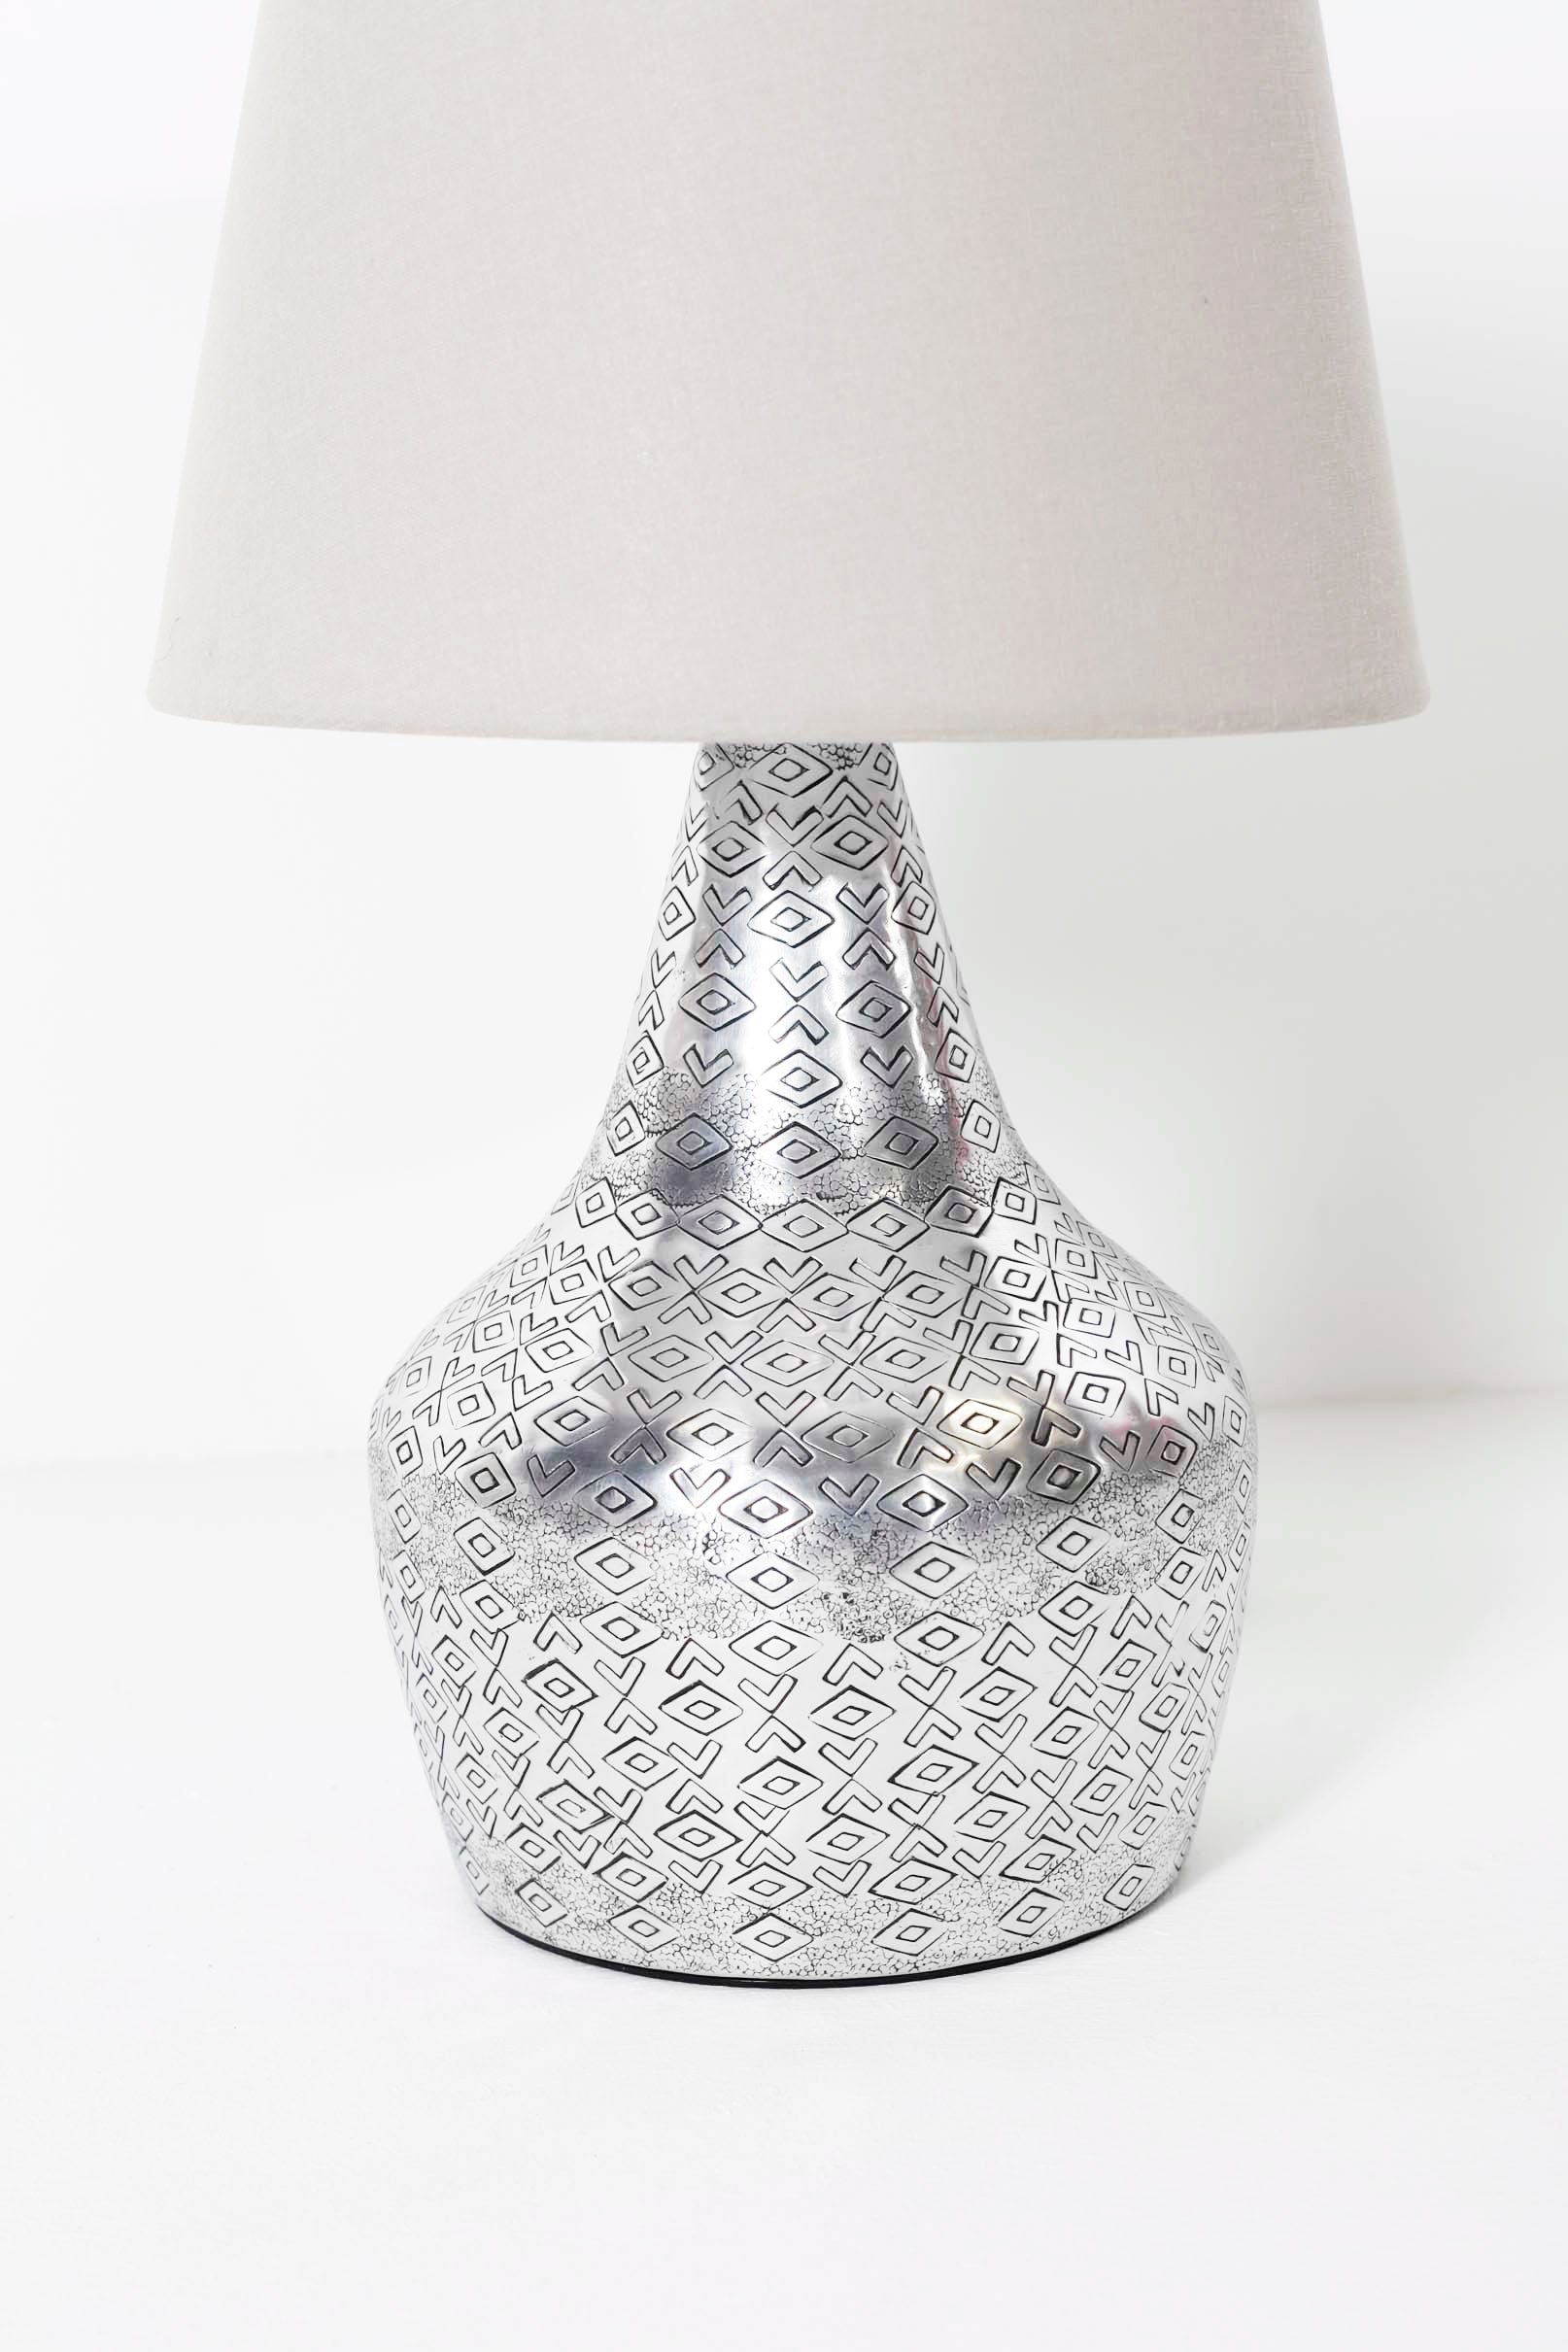 CHROME TABLE LAMP WITH EMBOSSED PATTERN AND BEIGE SHADE